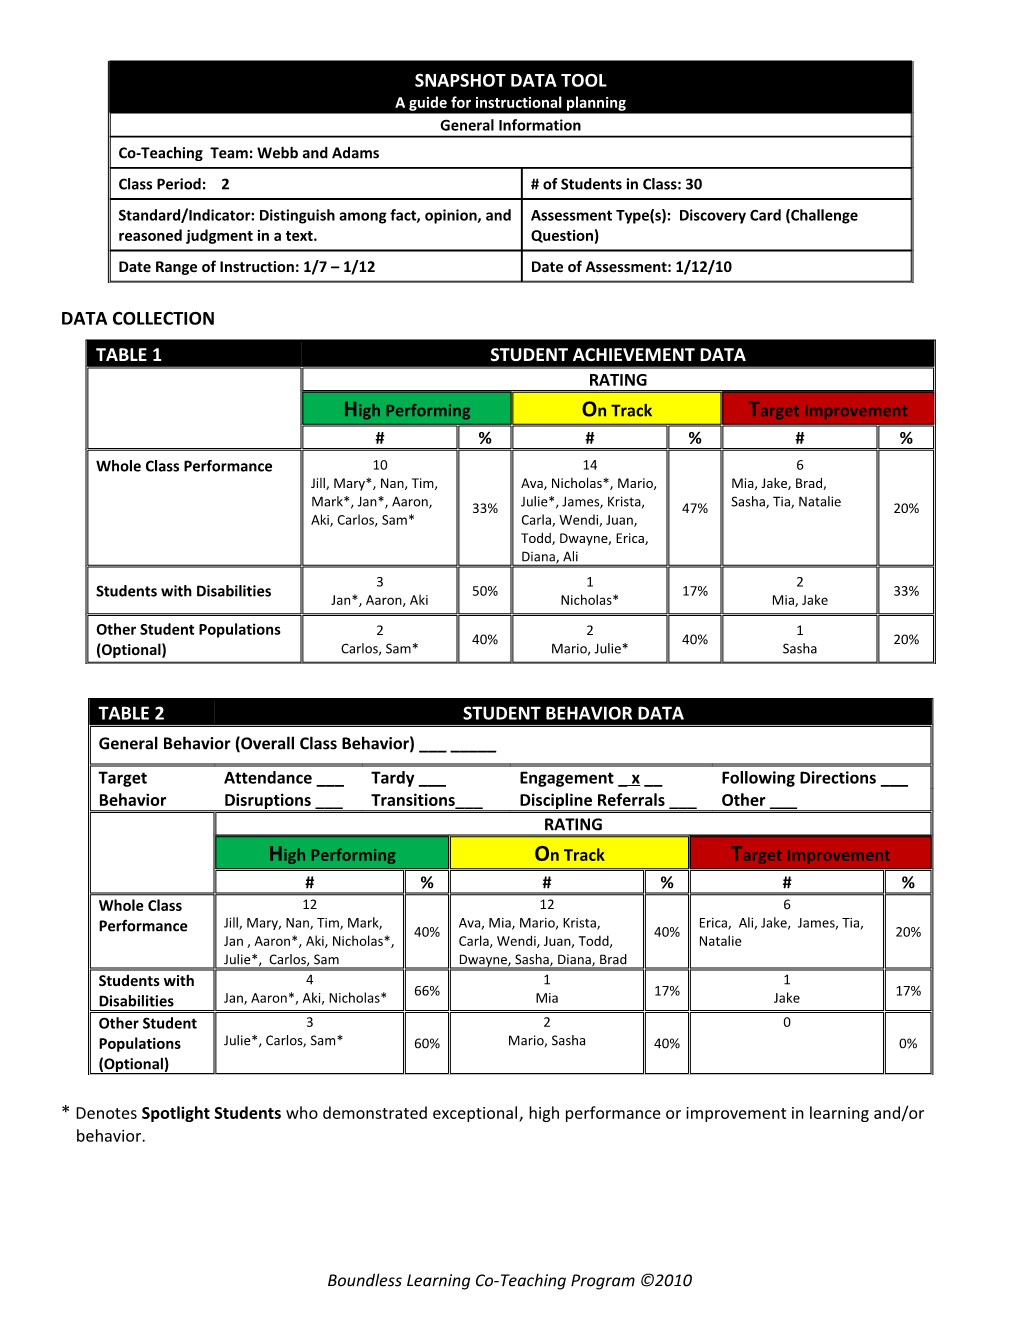 SNAPSHOT DATA TOOL a Guide for Instructional Planning